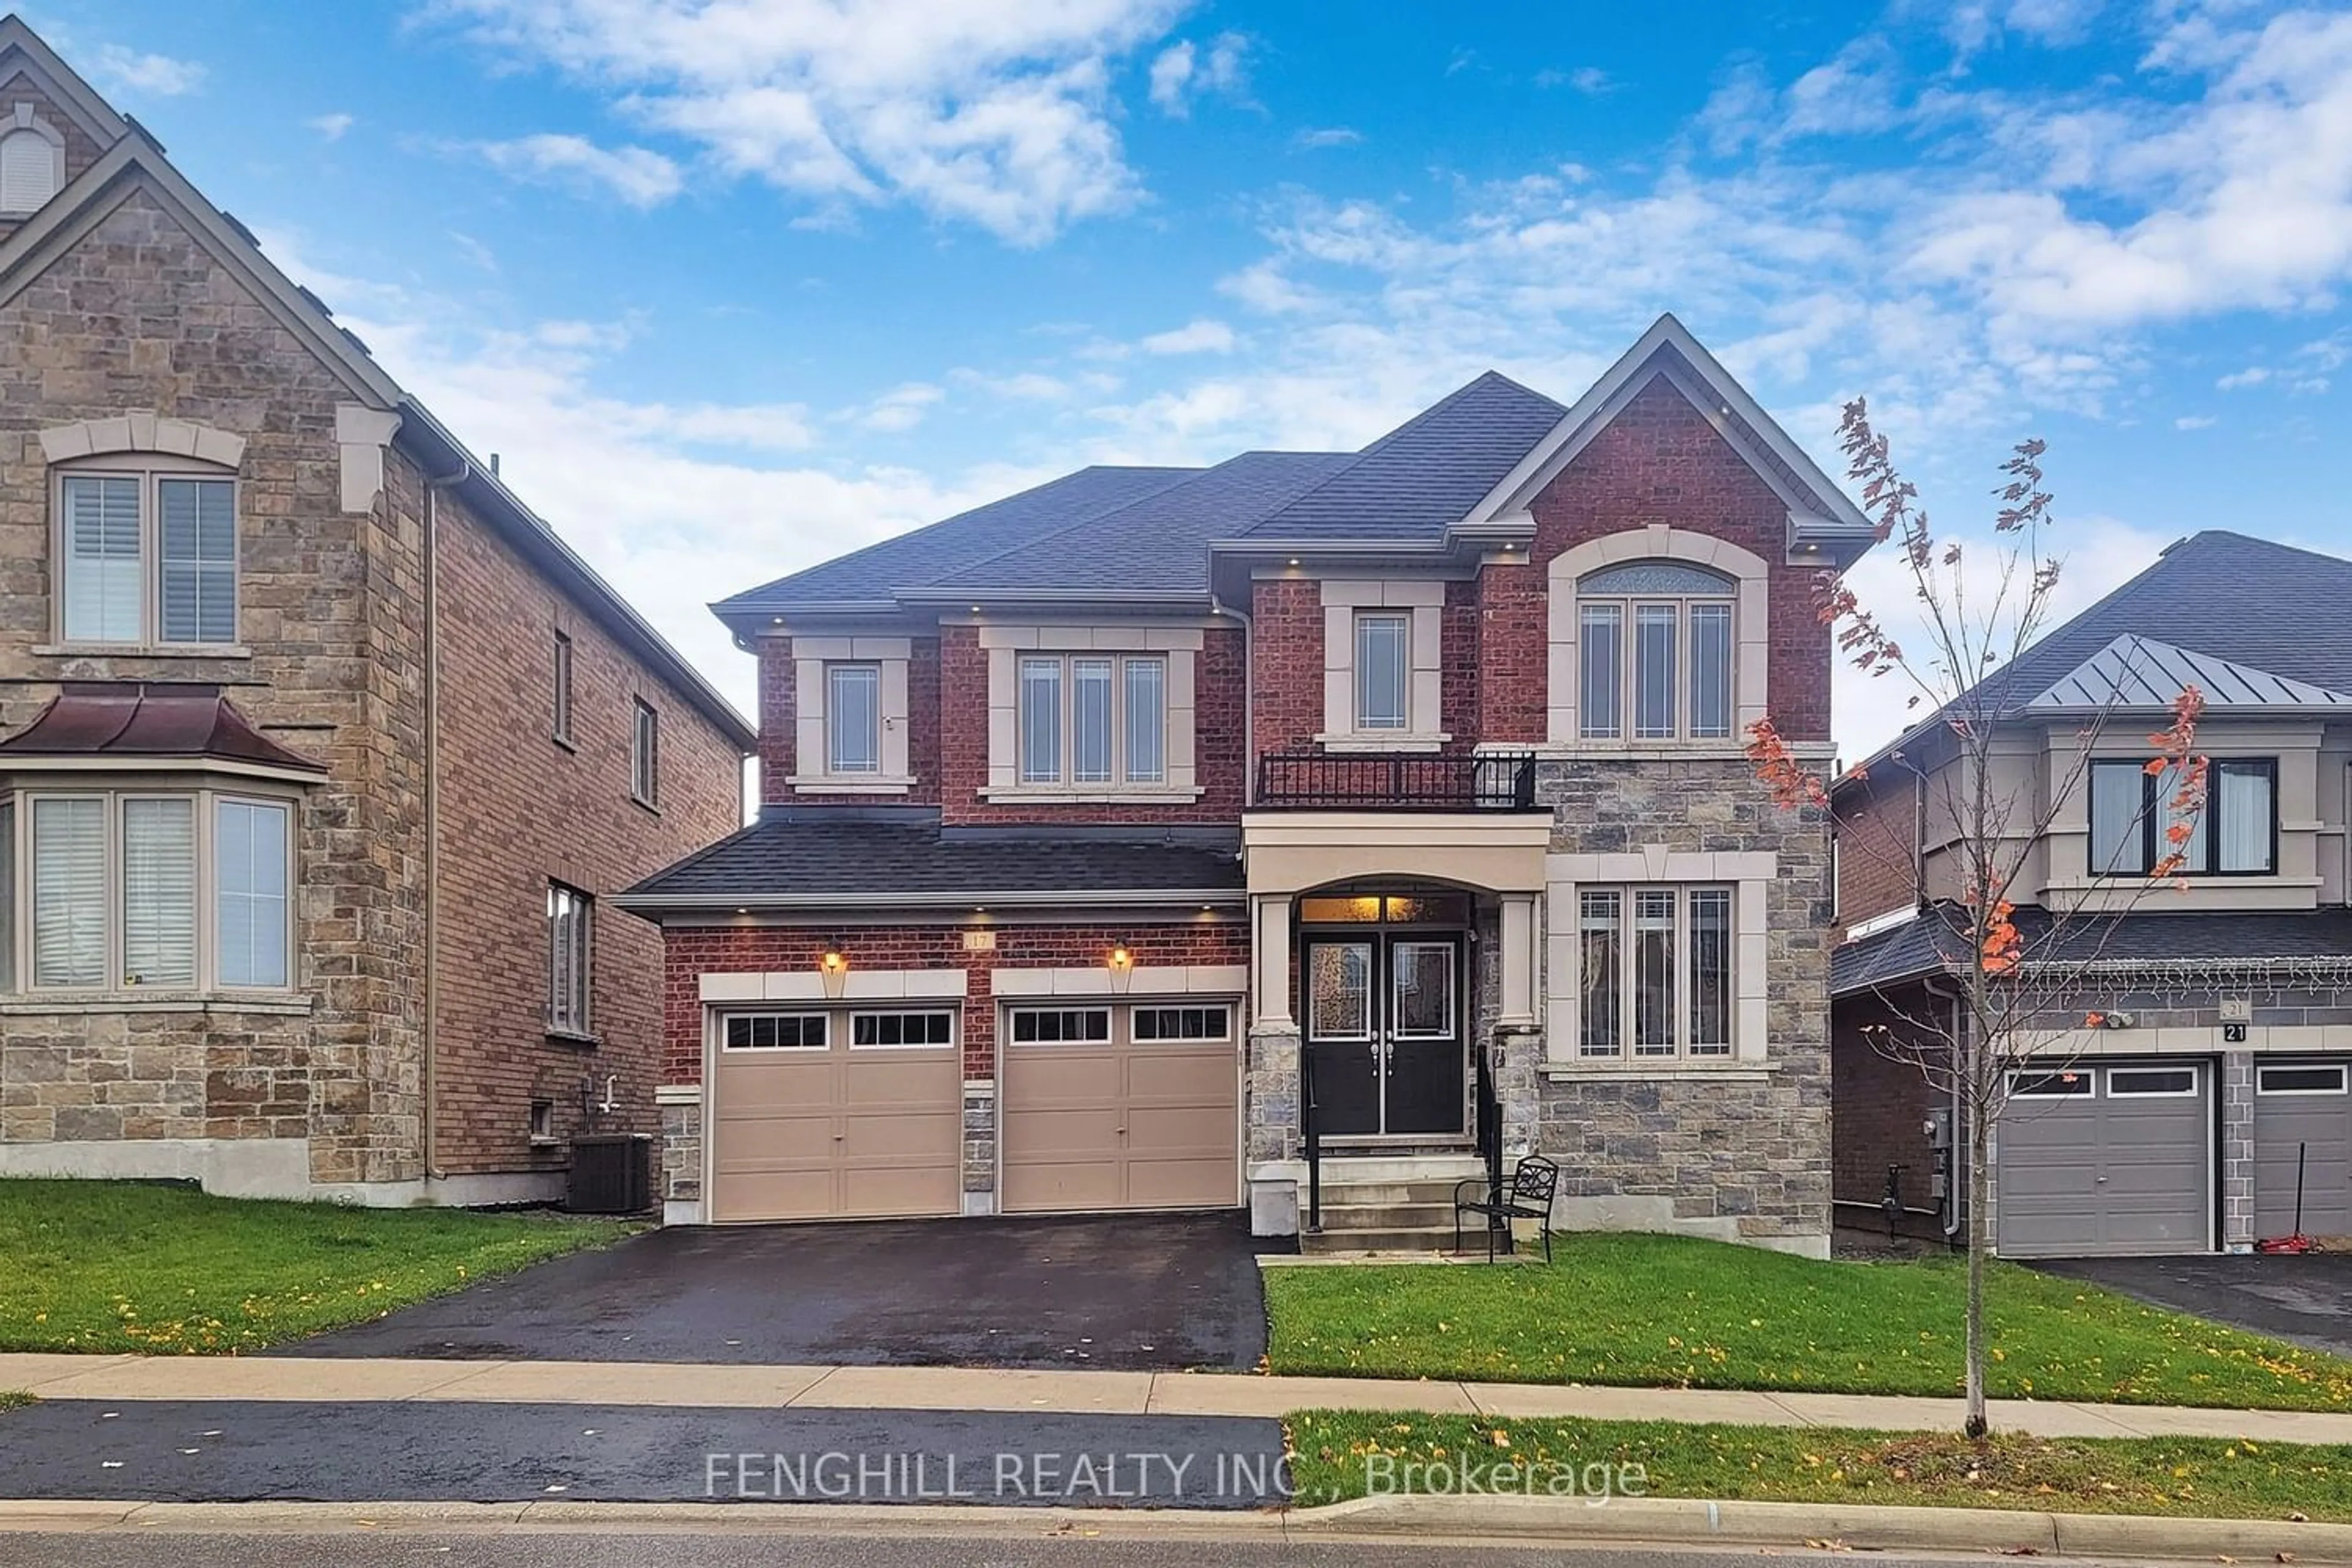 Home with brick exterior material for 17 Blazing Star St, East Gwillimbury Ontario L9N 0S2